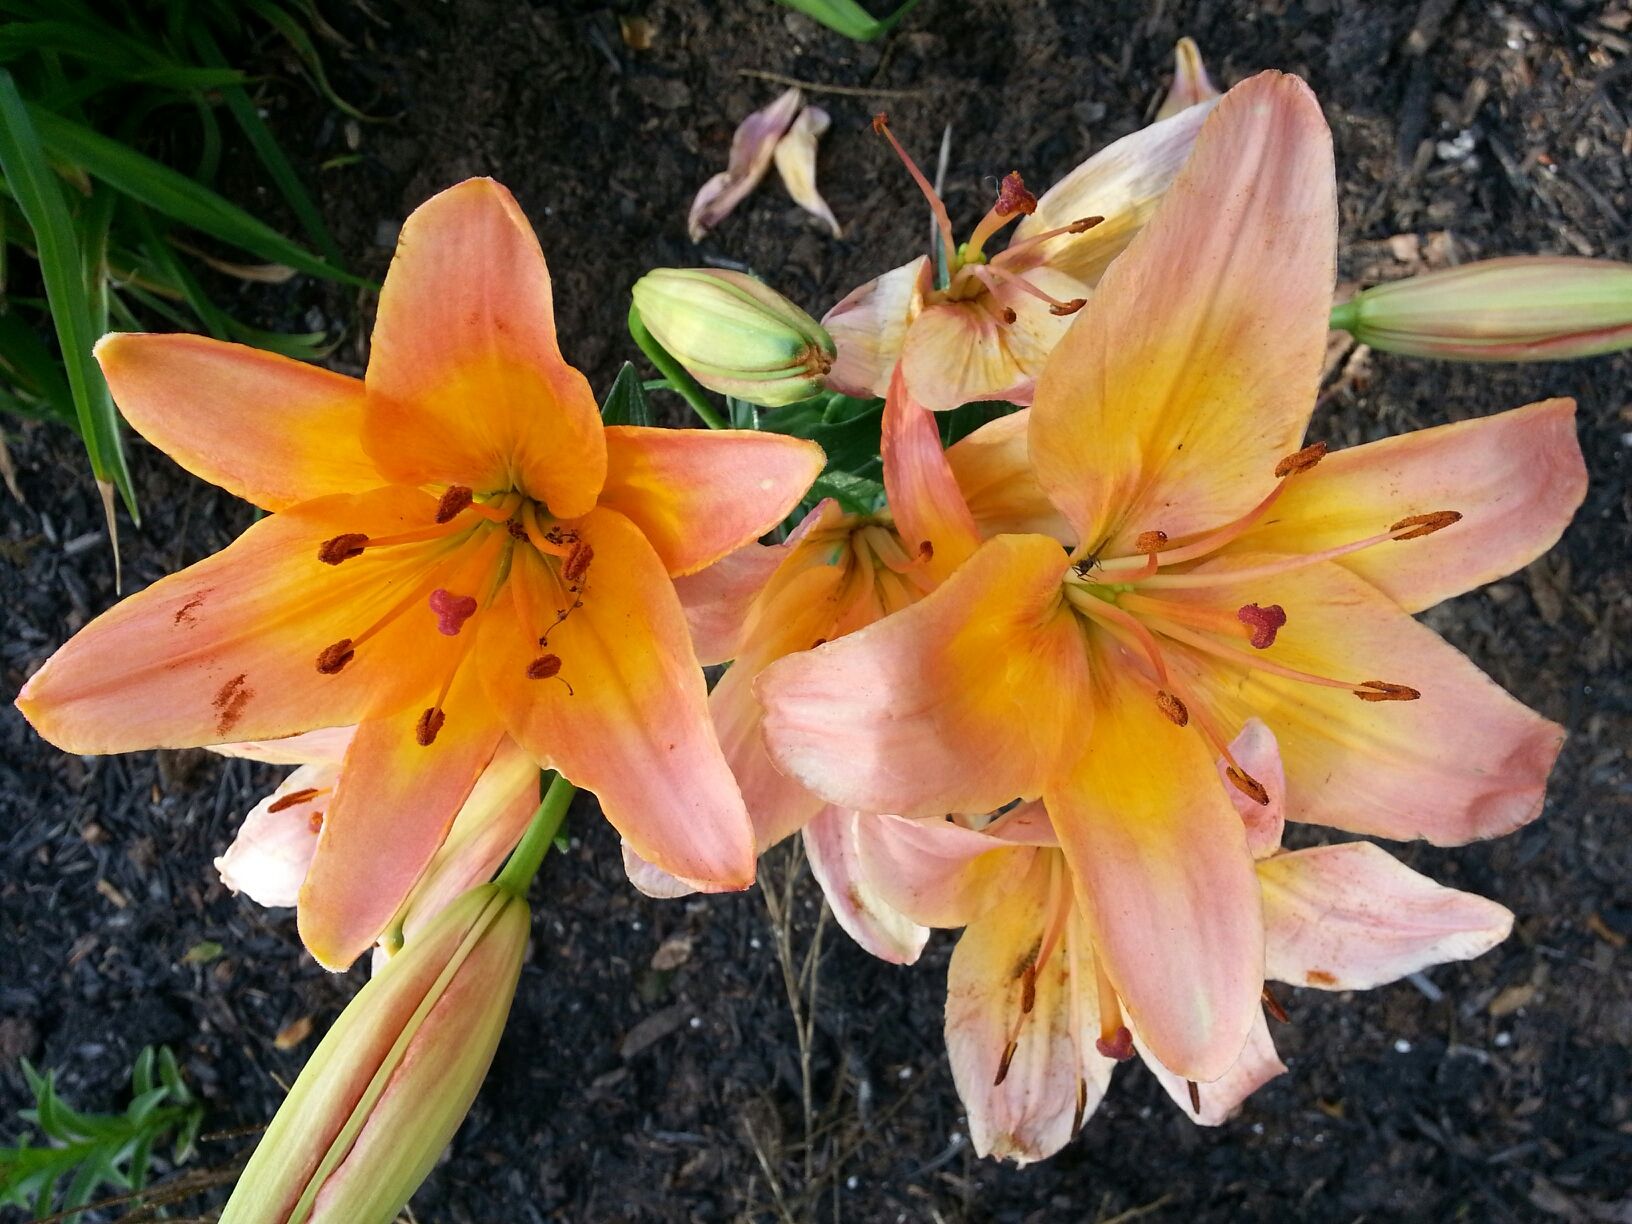 Pink/yellow lily 2014 | My Garden | Pinterest | Pink yellow and Gardens